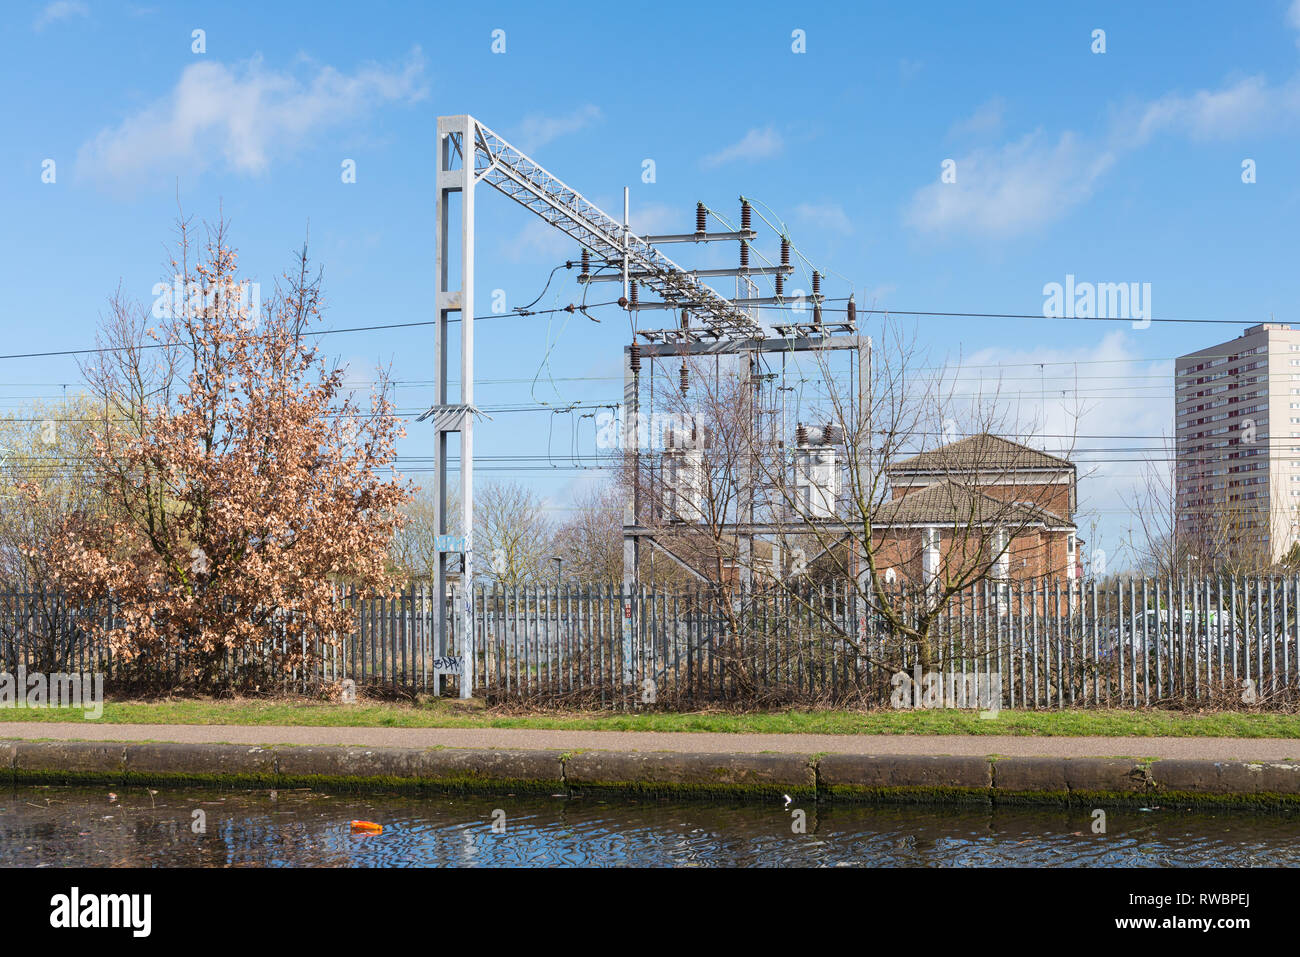 Over head power lines or cables on a railway track next to Birmingham Canal Old Line in Ladywood, Birmingham Stock Photo